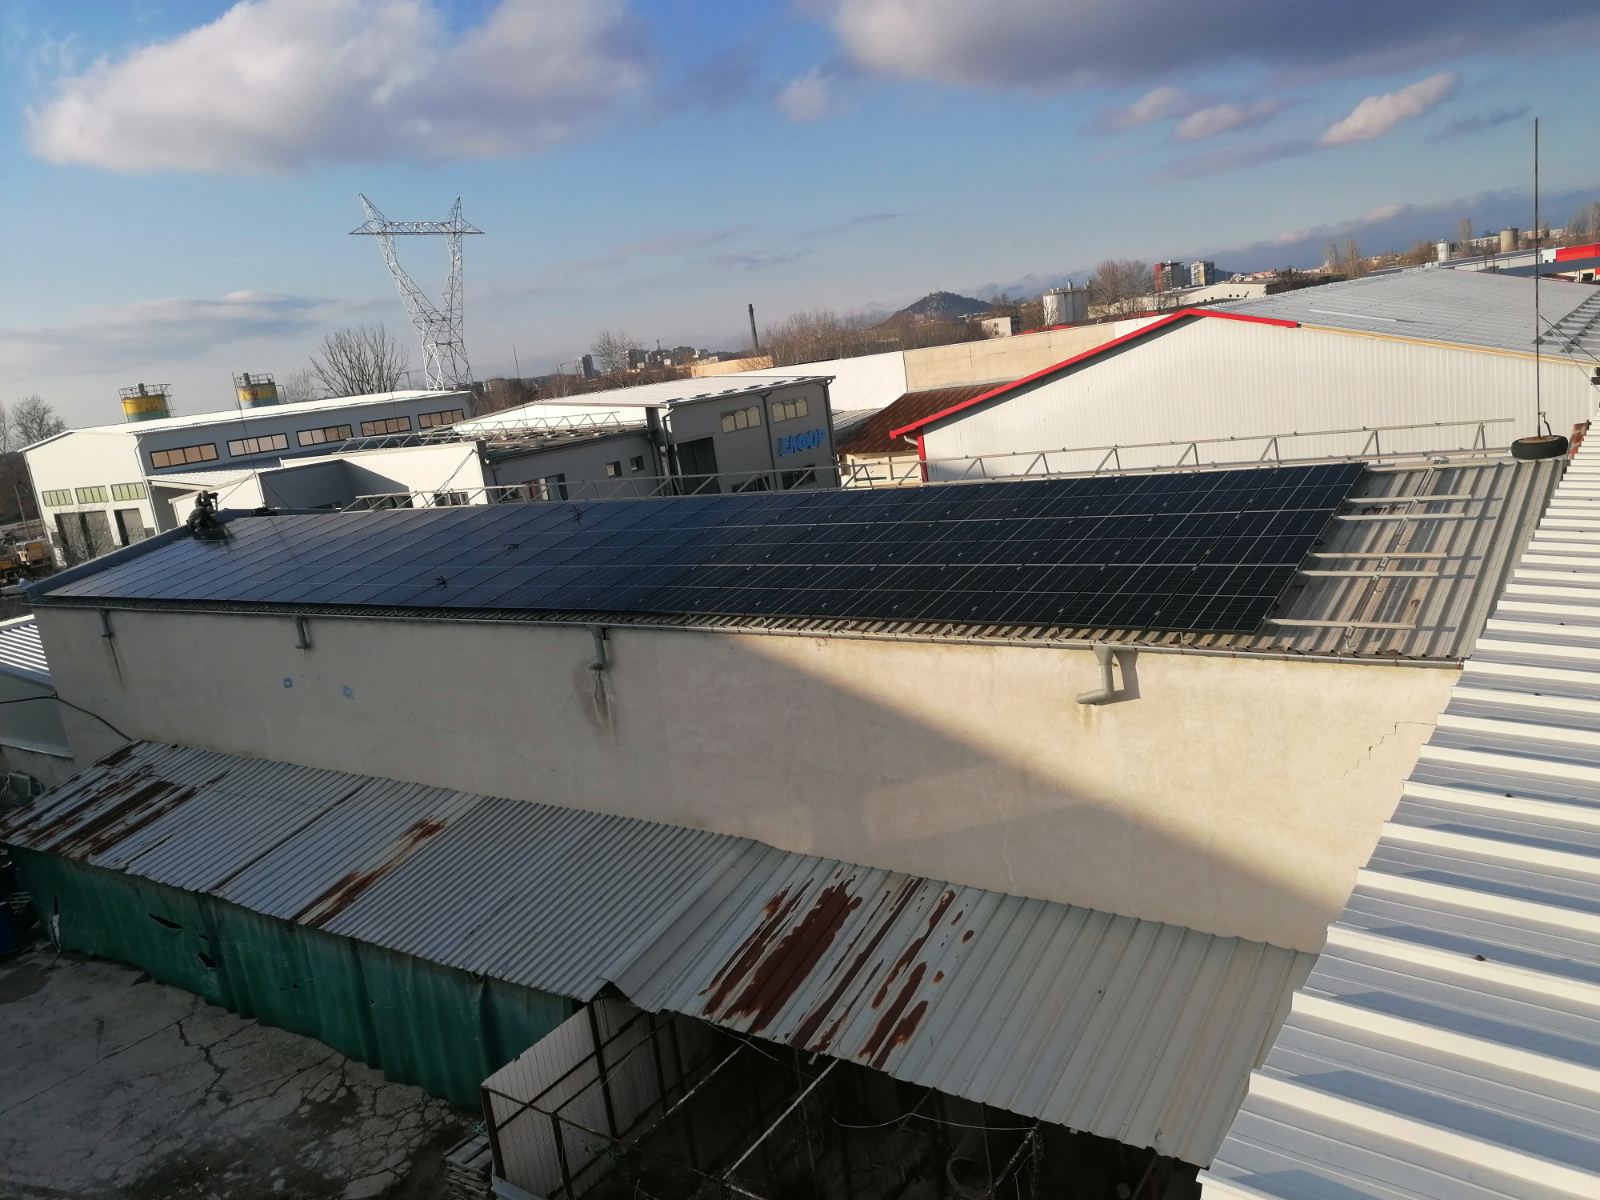 Construction of a solar system with installed capacity of 200kW